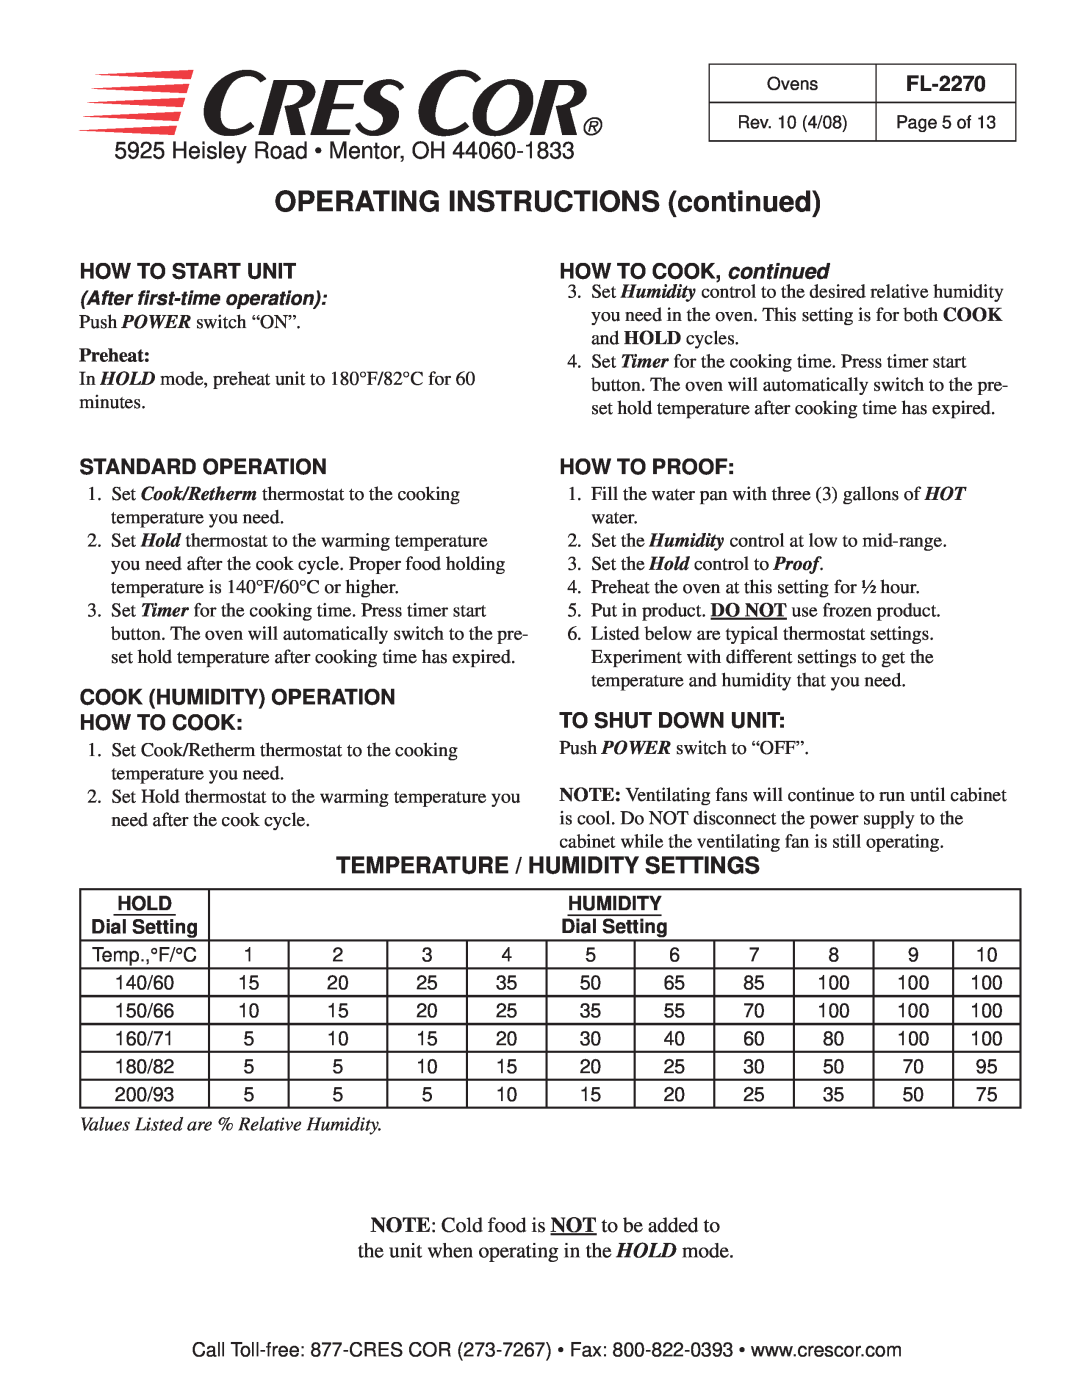 Cres Cor CO151XW185B OPERATING INSTRUCTIONS continued, Heisley Road Mentor, OH, Temperature / Humidity Settings, FL-2270 